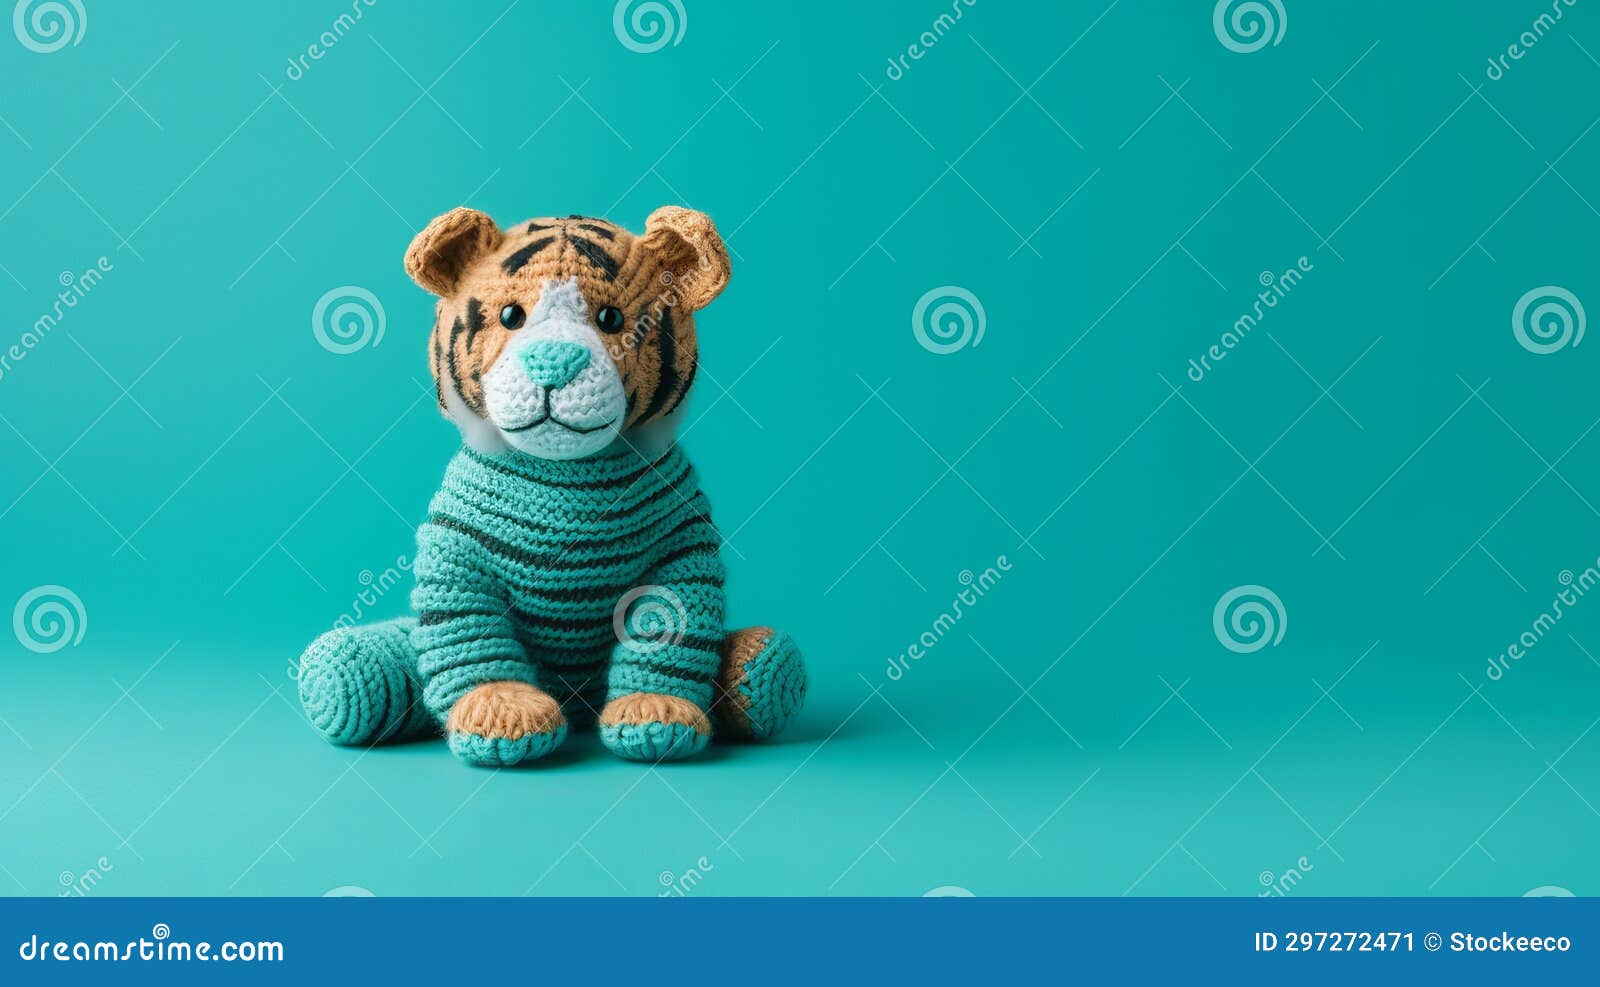 turquoise knitted tiger toy on a vibrant background